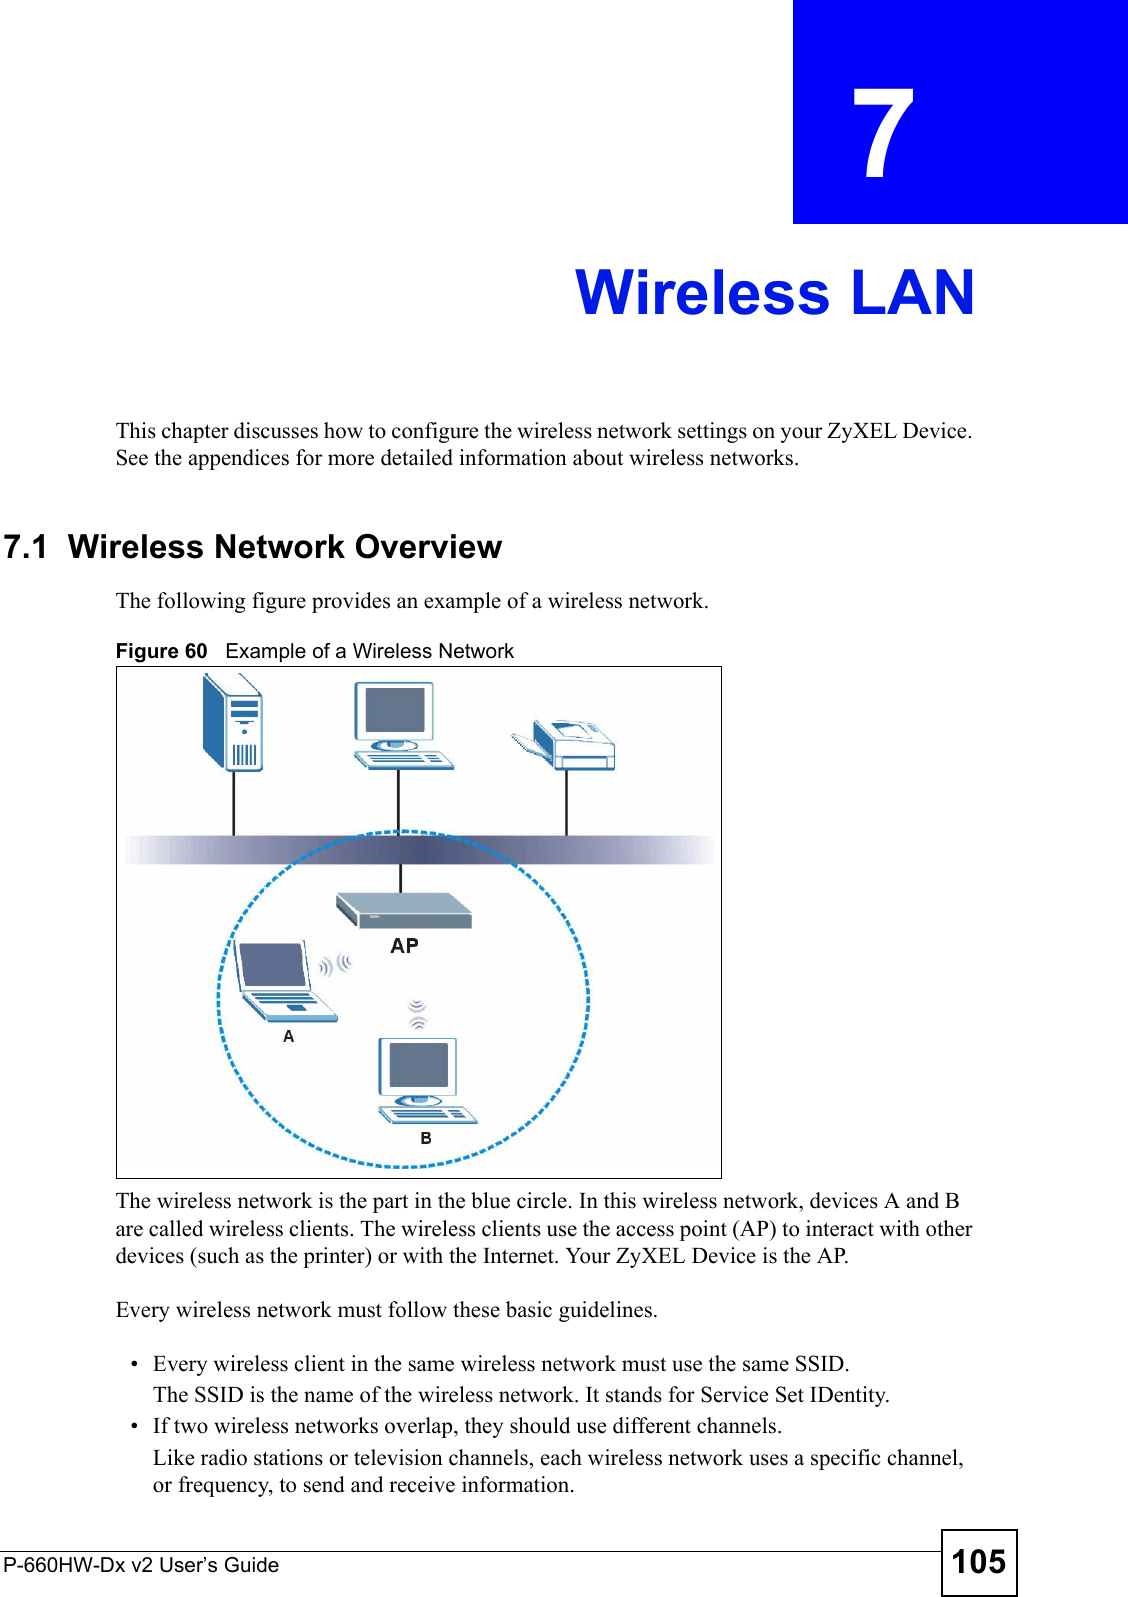 P-660HW-Dx v2 User’s Guide 105CHAPTER  7 Wireless LANThis chapter discusses how to configure the wireless network settings on your ZyXEL Device. See the appendices for more detailed information about wireless networks.7.1  Wireless Network OverviewThe following figure provides an example of a wireless network.Figure 60   Example of a Wireless NetworkThe wireless network is the part in the blue circle. In this wireless network, devices A and B are called wireless clients. The wireless clients use the access point (AP) to interact with other devices (such as the printer) or with the Internet. Your ZyXEL Device is the AP.Every wireless network must follow these basic guidelines.• Every wireless client in the same wireless network must use the same SSID.The SSID is the name of the wireless network. It stands for Service Set IDentity.• If two wireless networks overlap, they should use different channels.Like radio stations or television channels, each wireless network uses a specific channel, or frequency, to send and receive information.